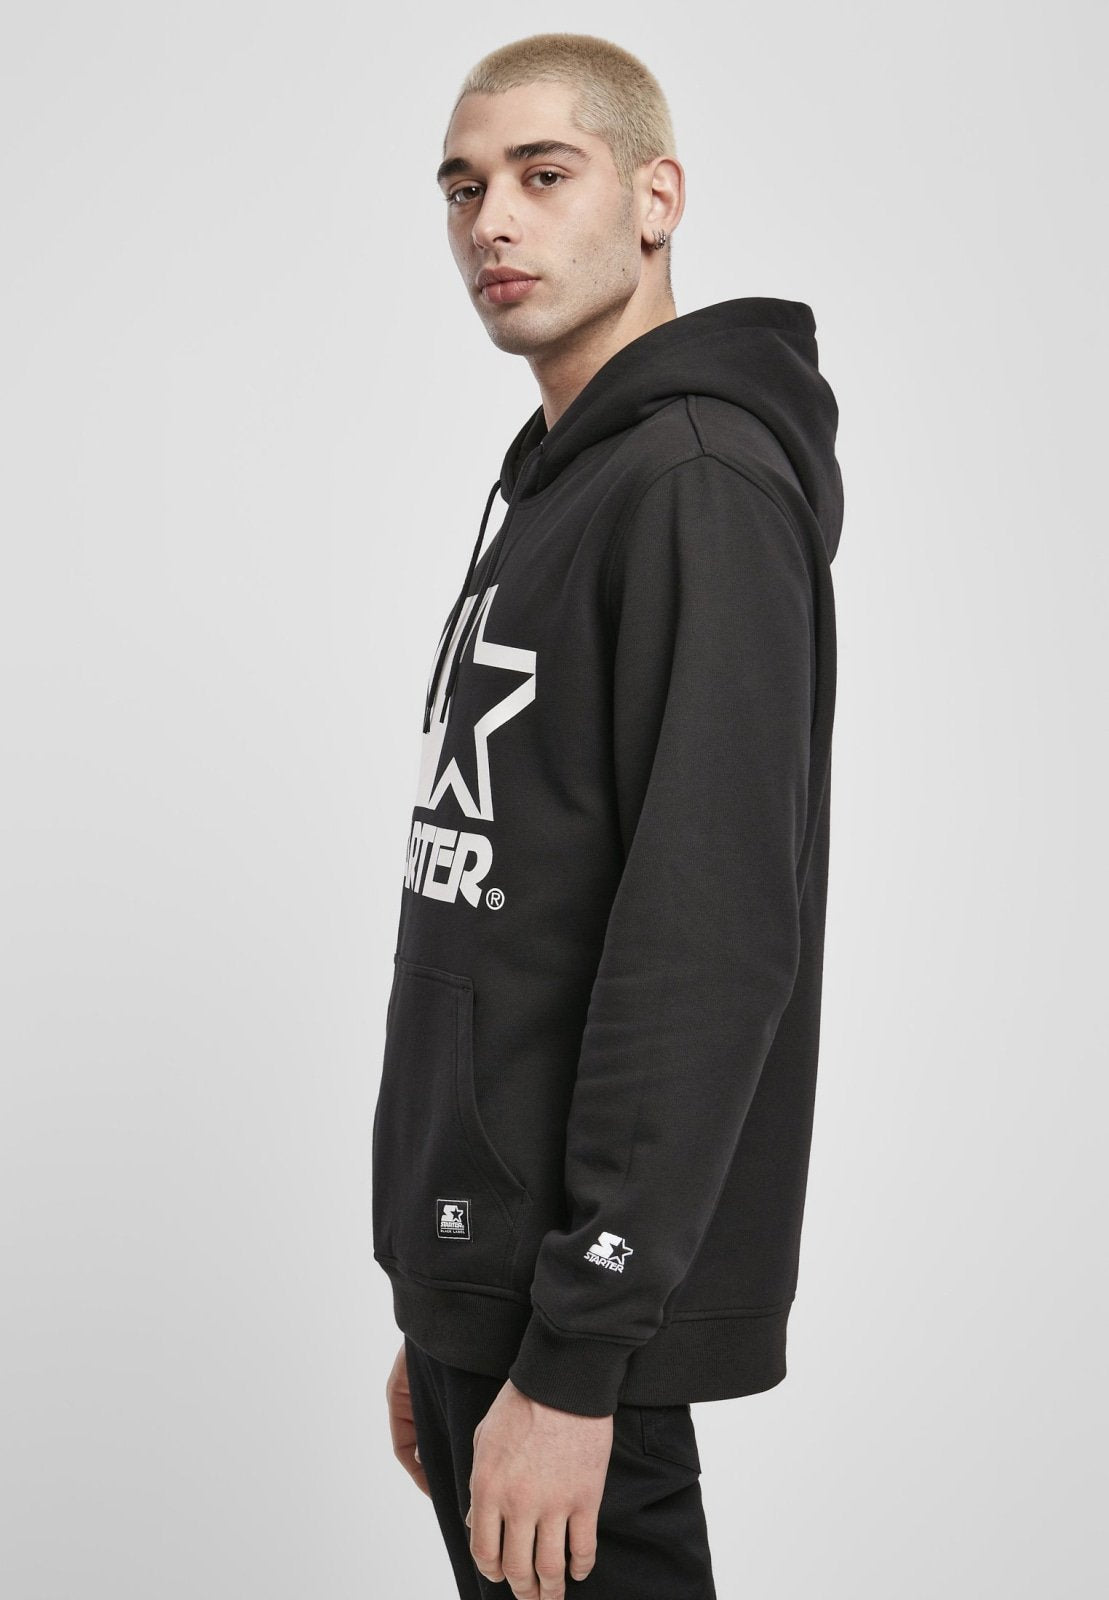 Starter The Classic Logo Hoodie (4 colors)